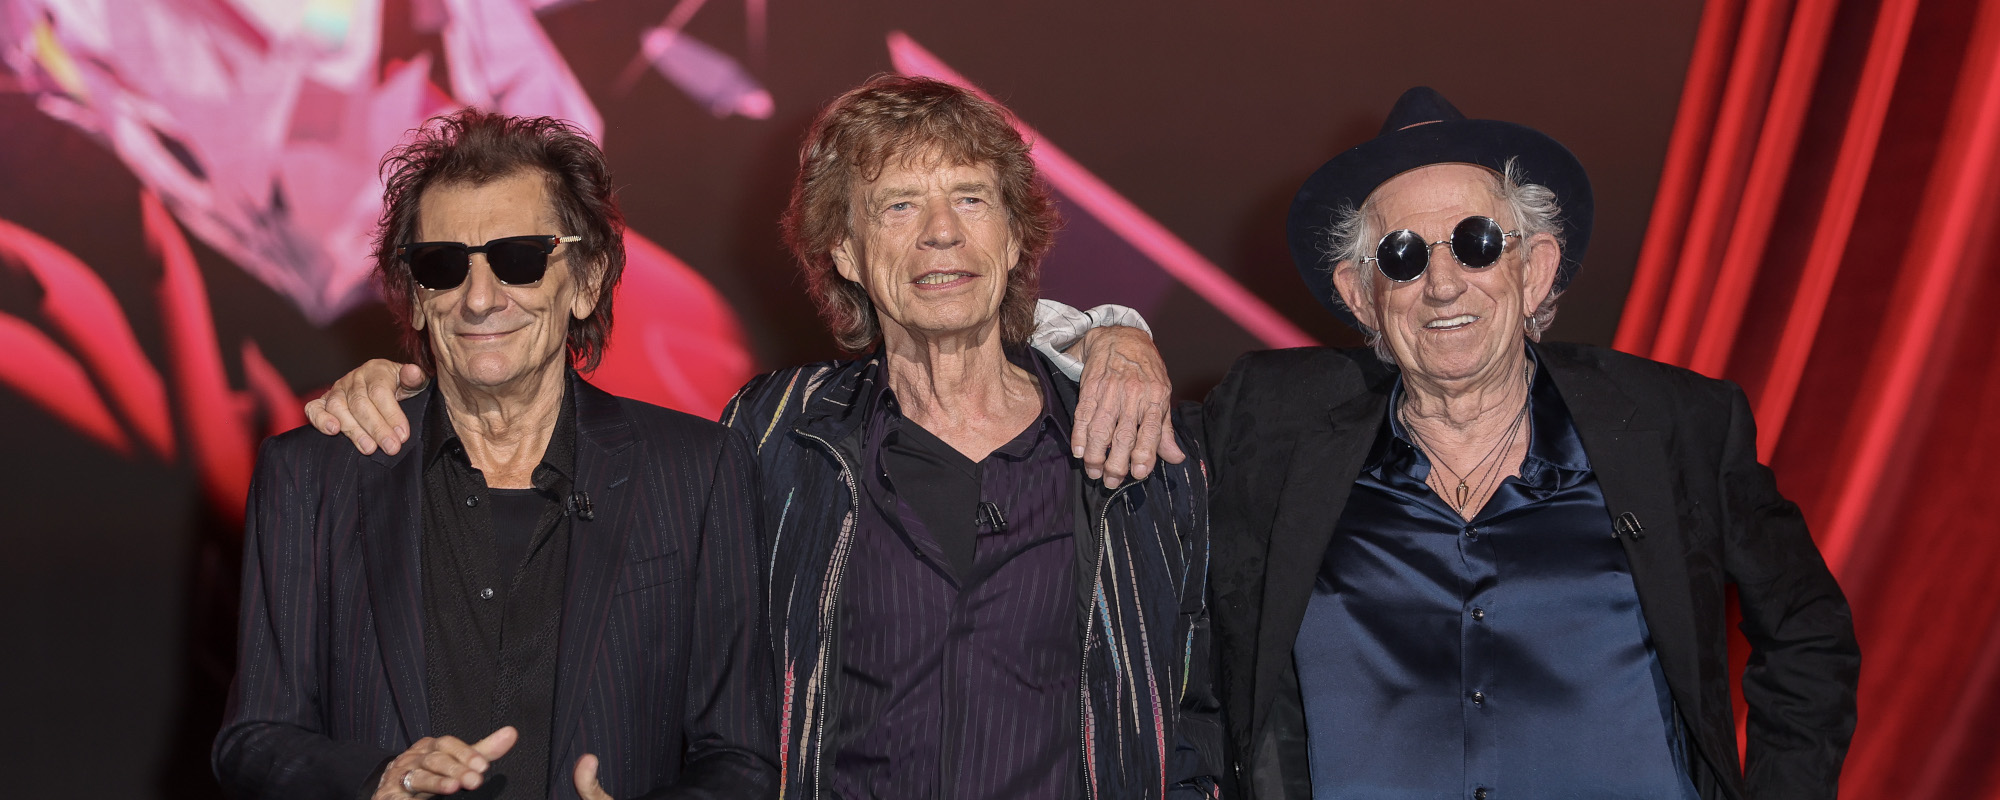 The Rolling Stones Tease Lady Gaga and Stevie Wonder Collaboration ‘Sweet Sounds of Heaven’